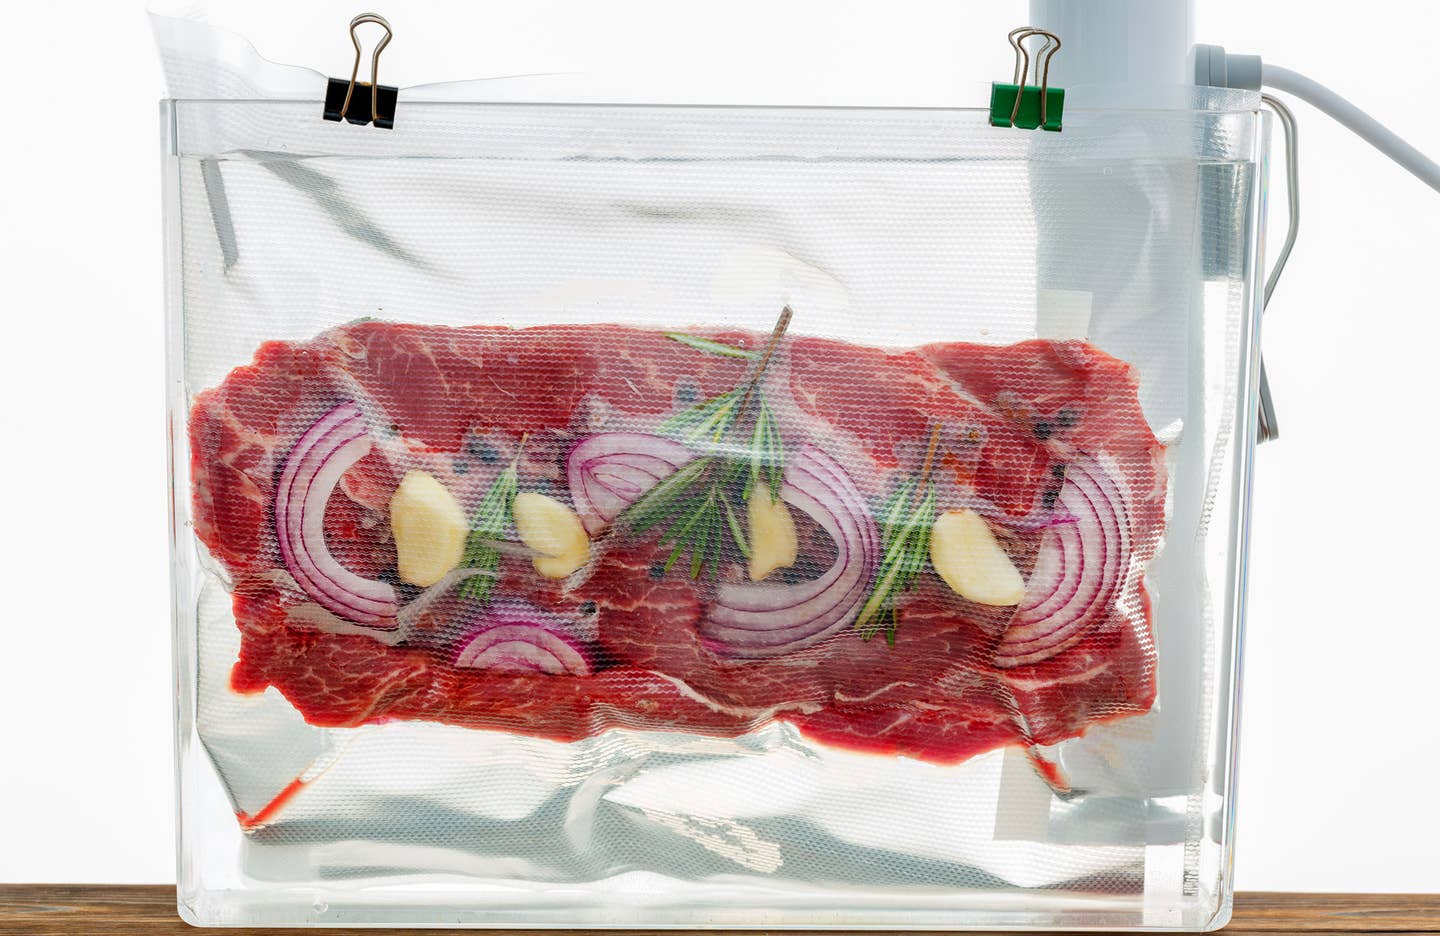 The Best Sous Vide Cooker to Make Restaurant-Worthy Dishes at Home